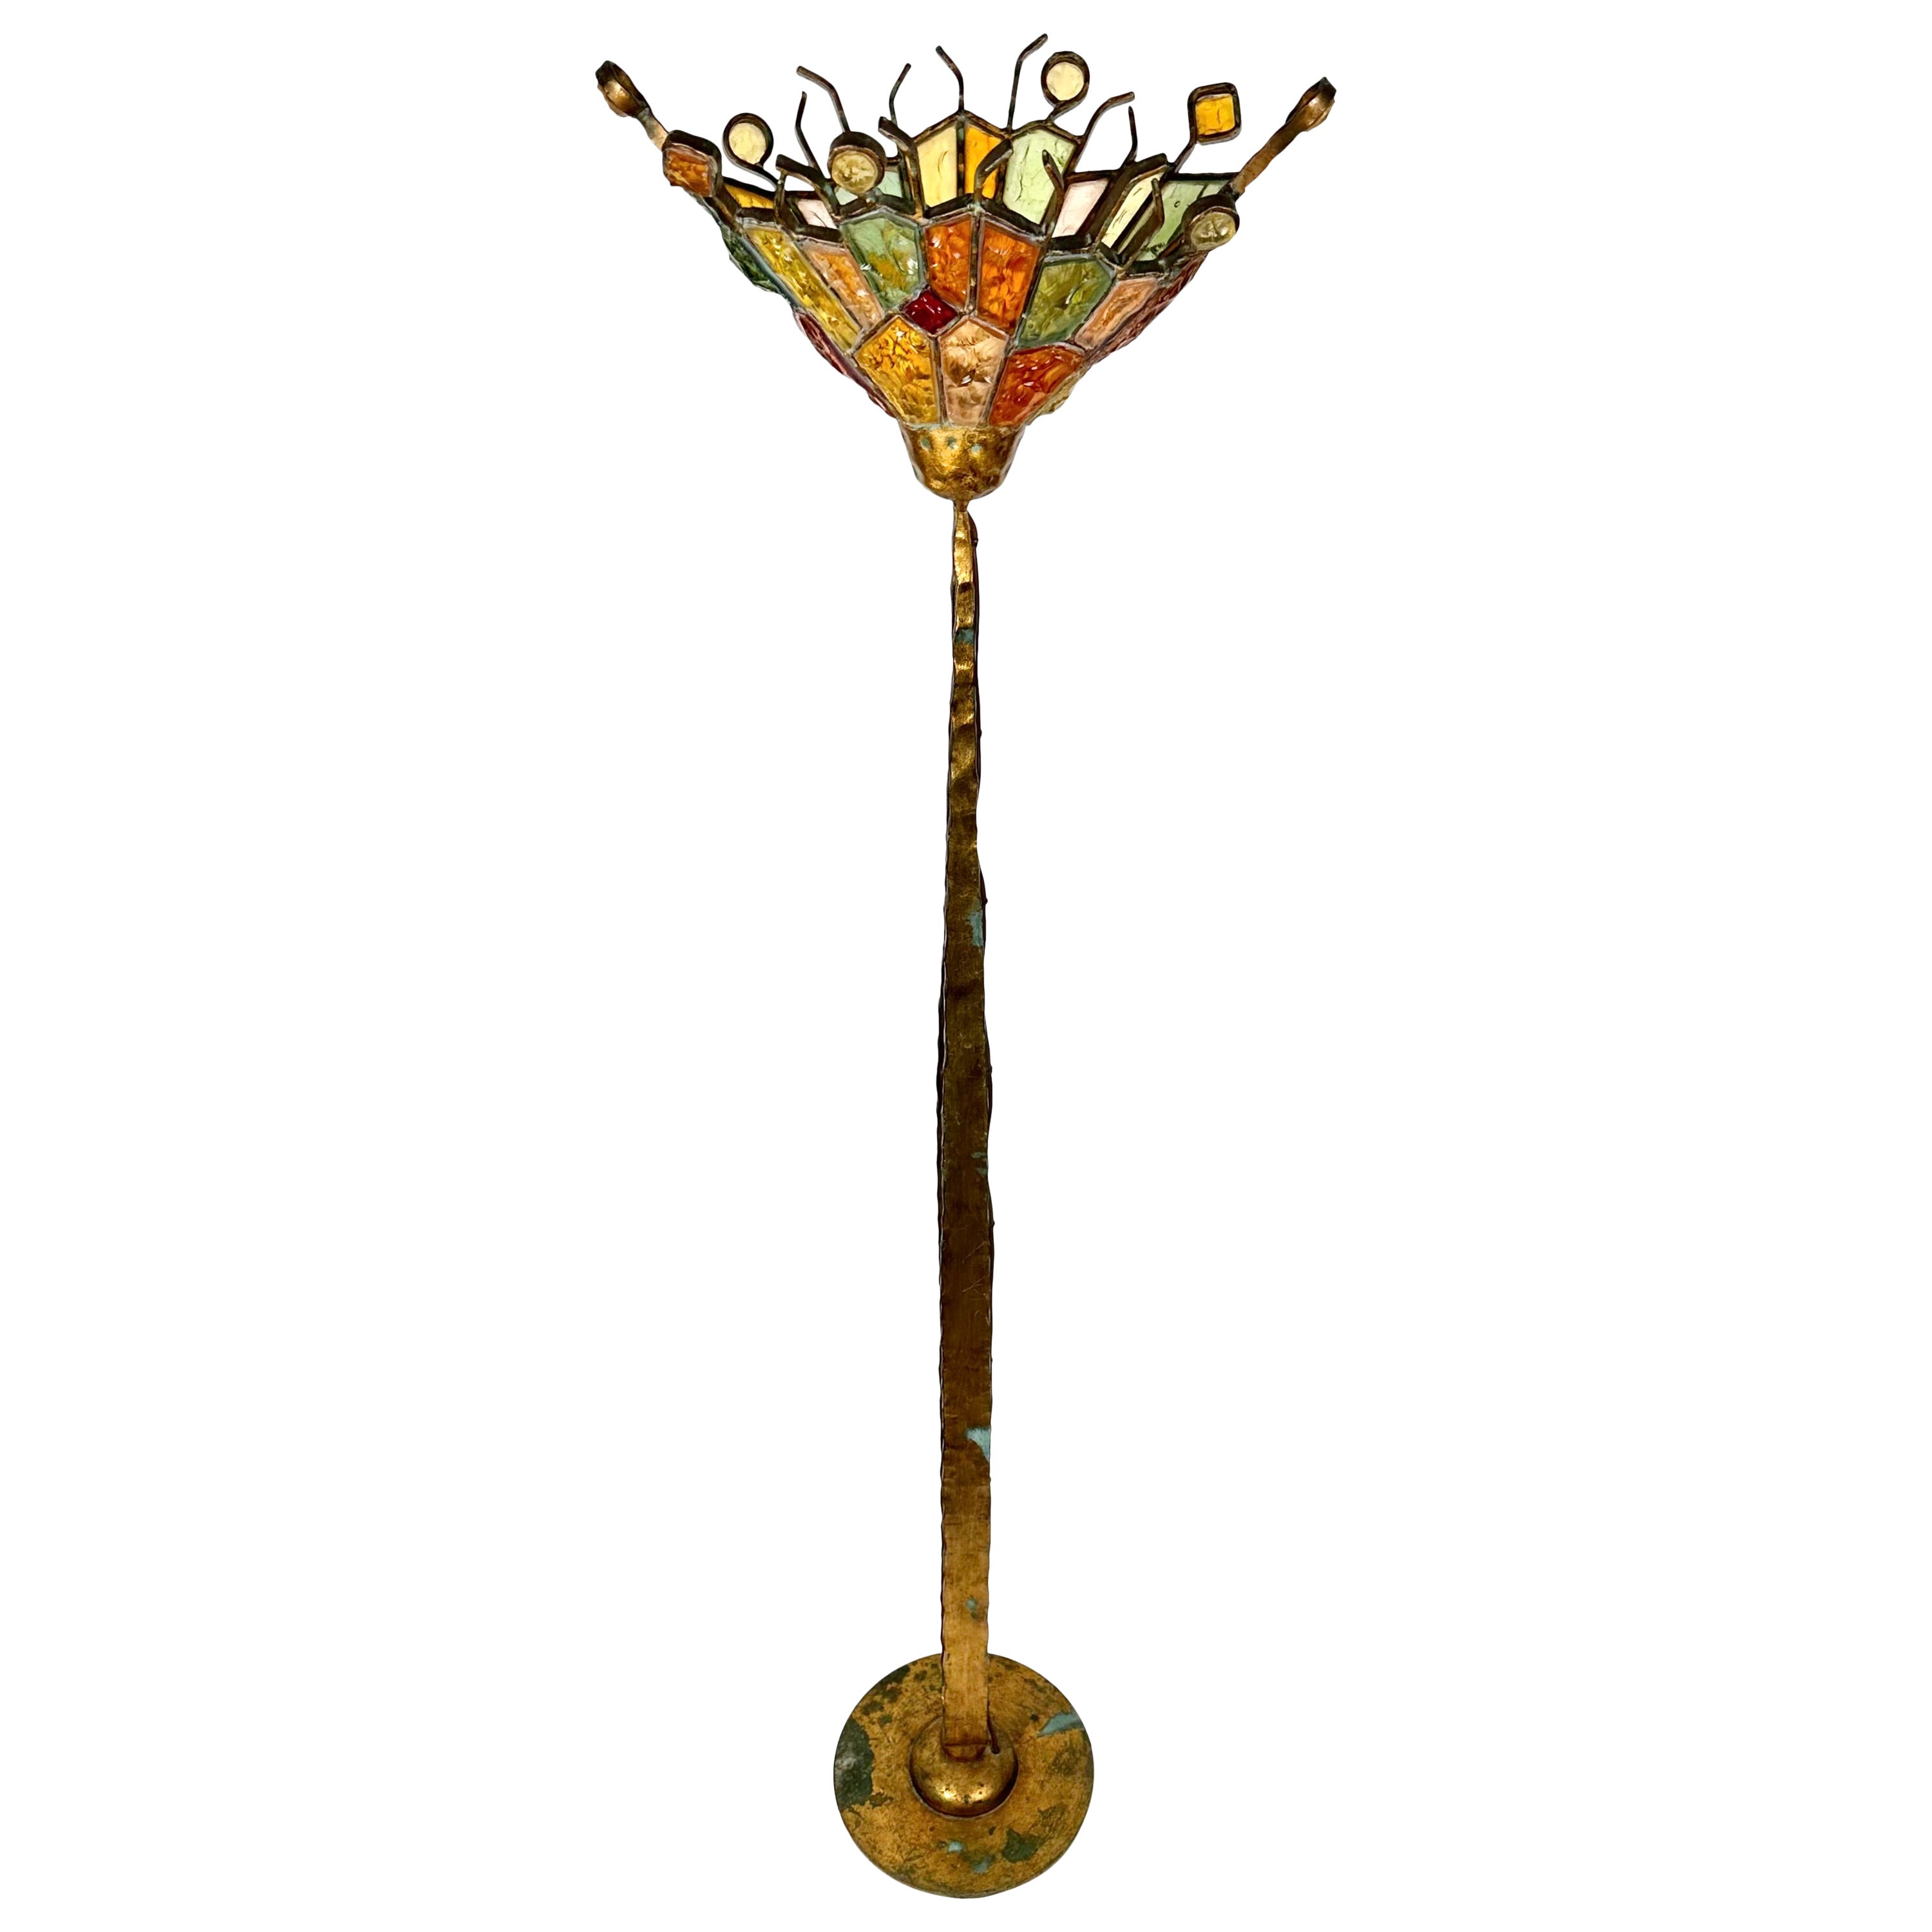 Brutalist Iron and Art Glass Floor Lamp Albano Poli for Poliarte, Italy 1970s For Sale